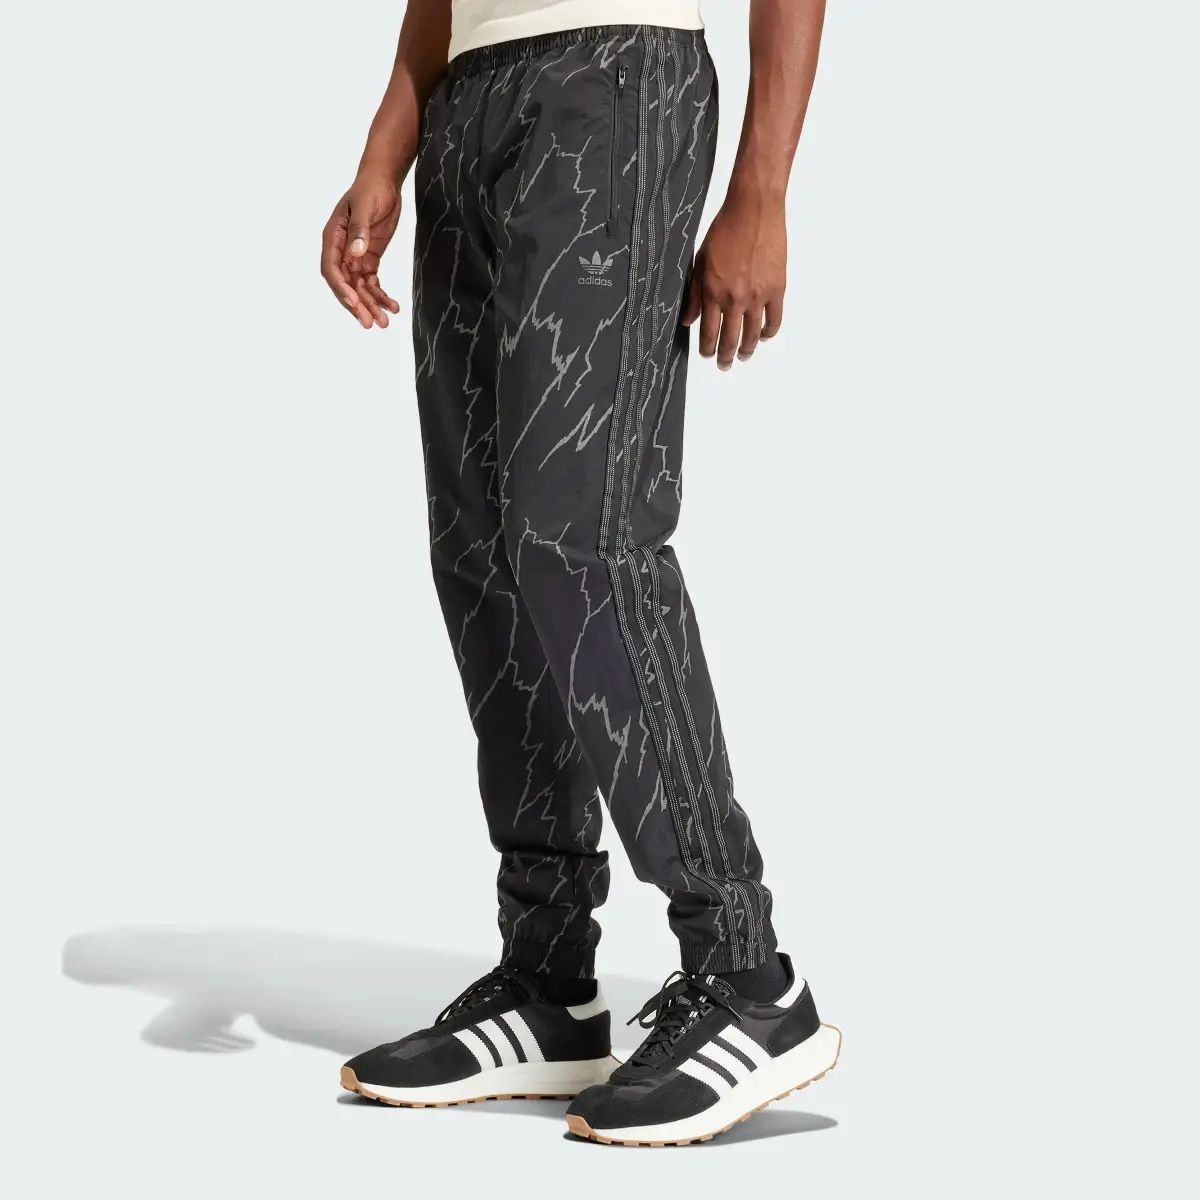 Adidas Track pants Allover Print SST. 1